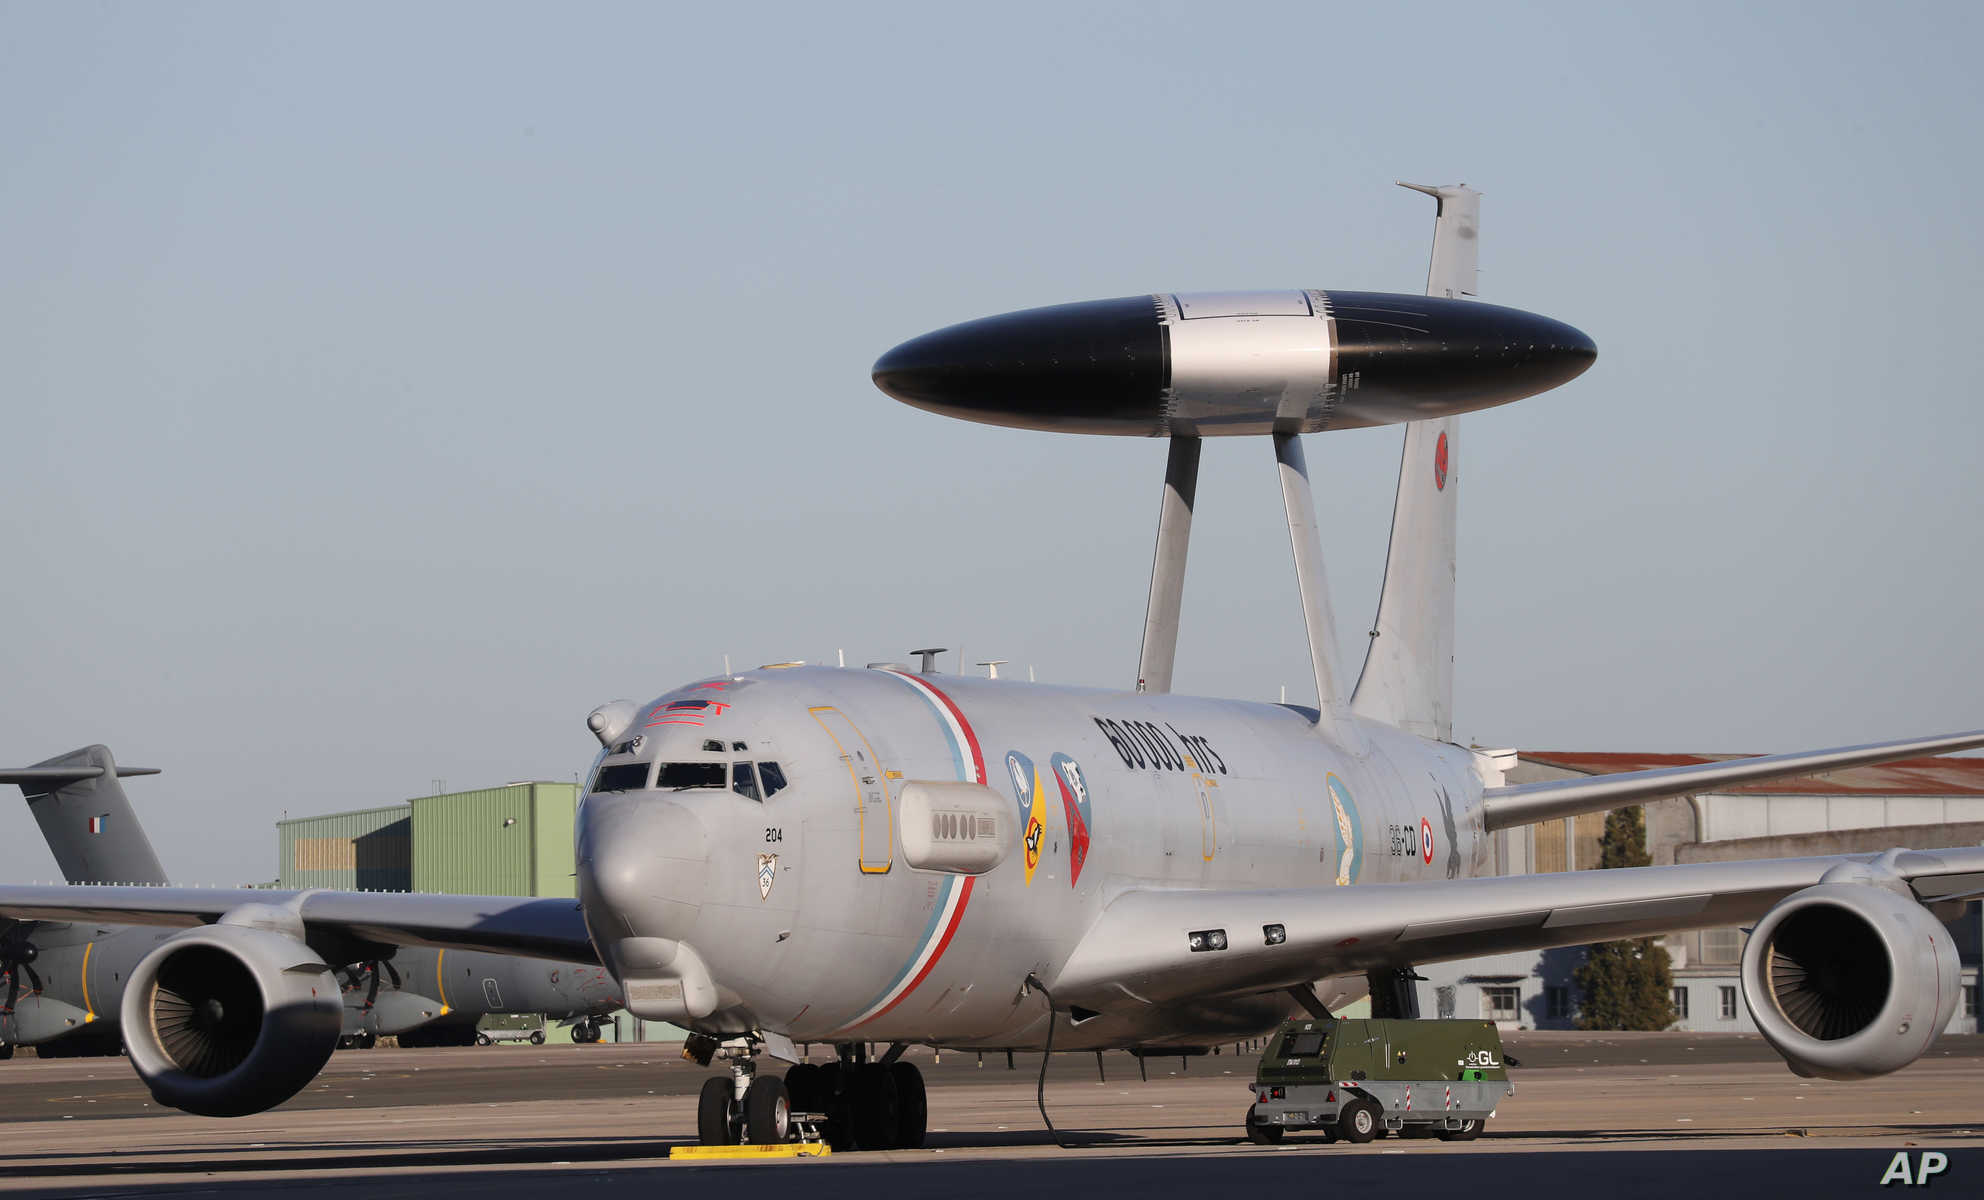 A French air force AWACS plane is parked on a tarmac at an army base in Orleans, central France, Thursday, Jan. 16, 2020. (Ludovic Marin/Pool Photo via AP)